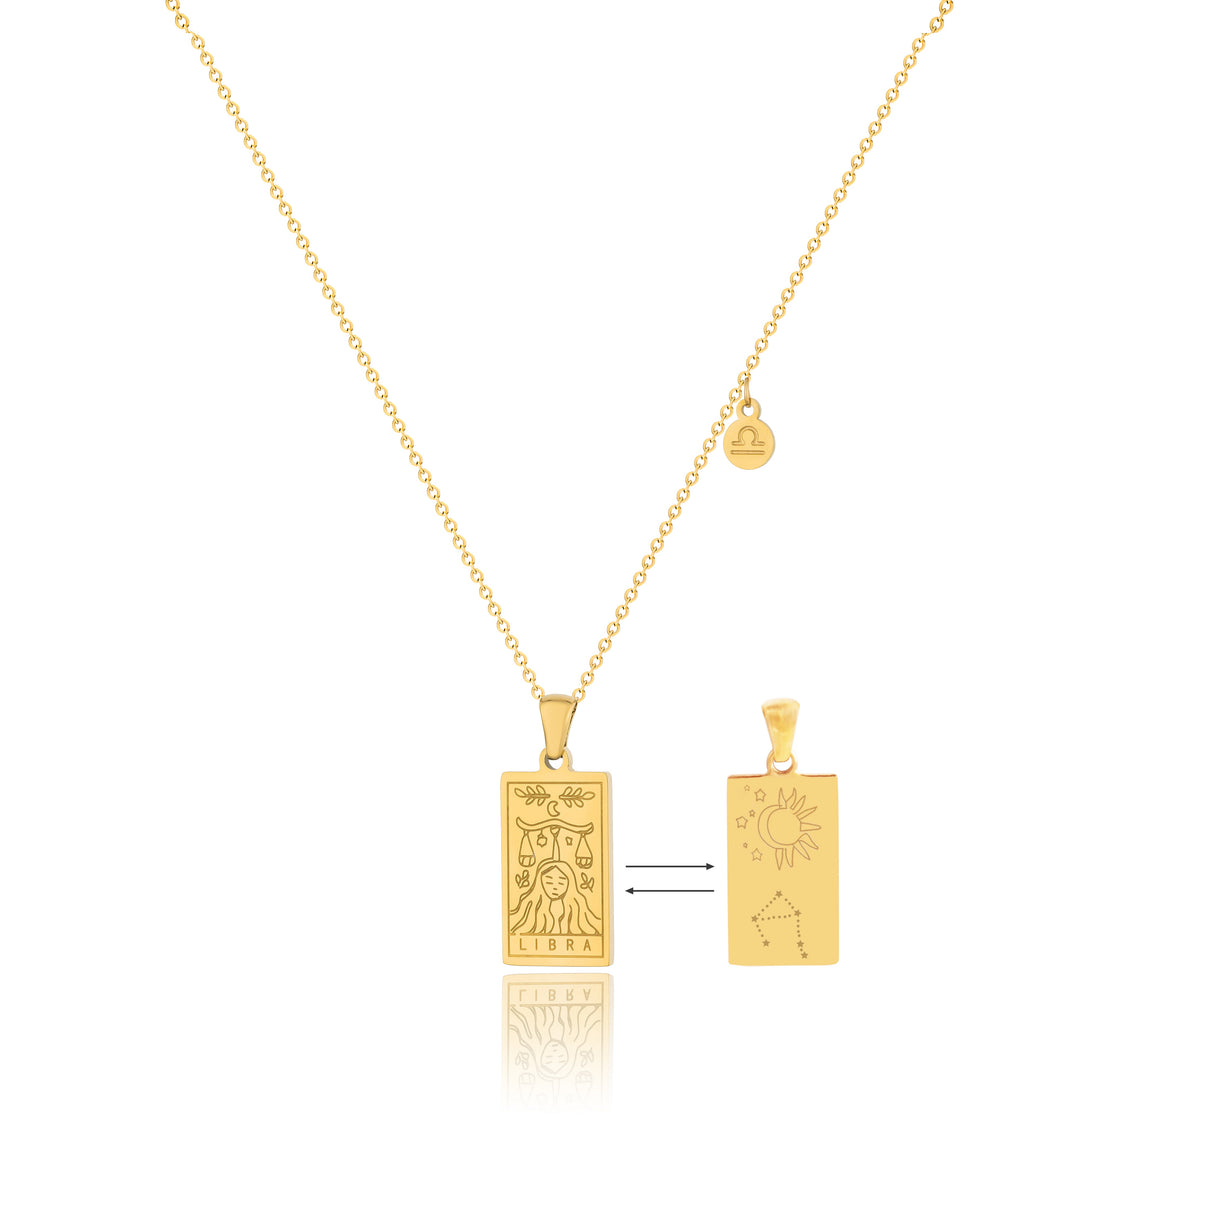 14K Gold Plated Gold 12 Constellation Pendant Necklace - GexWorldwide